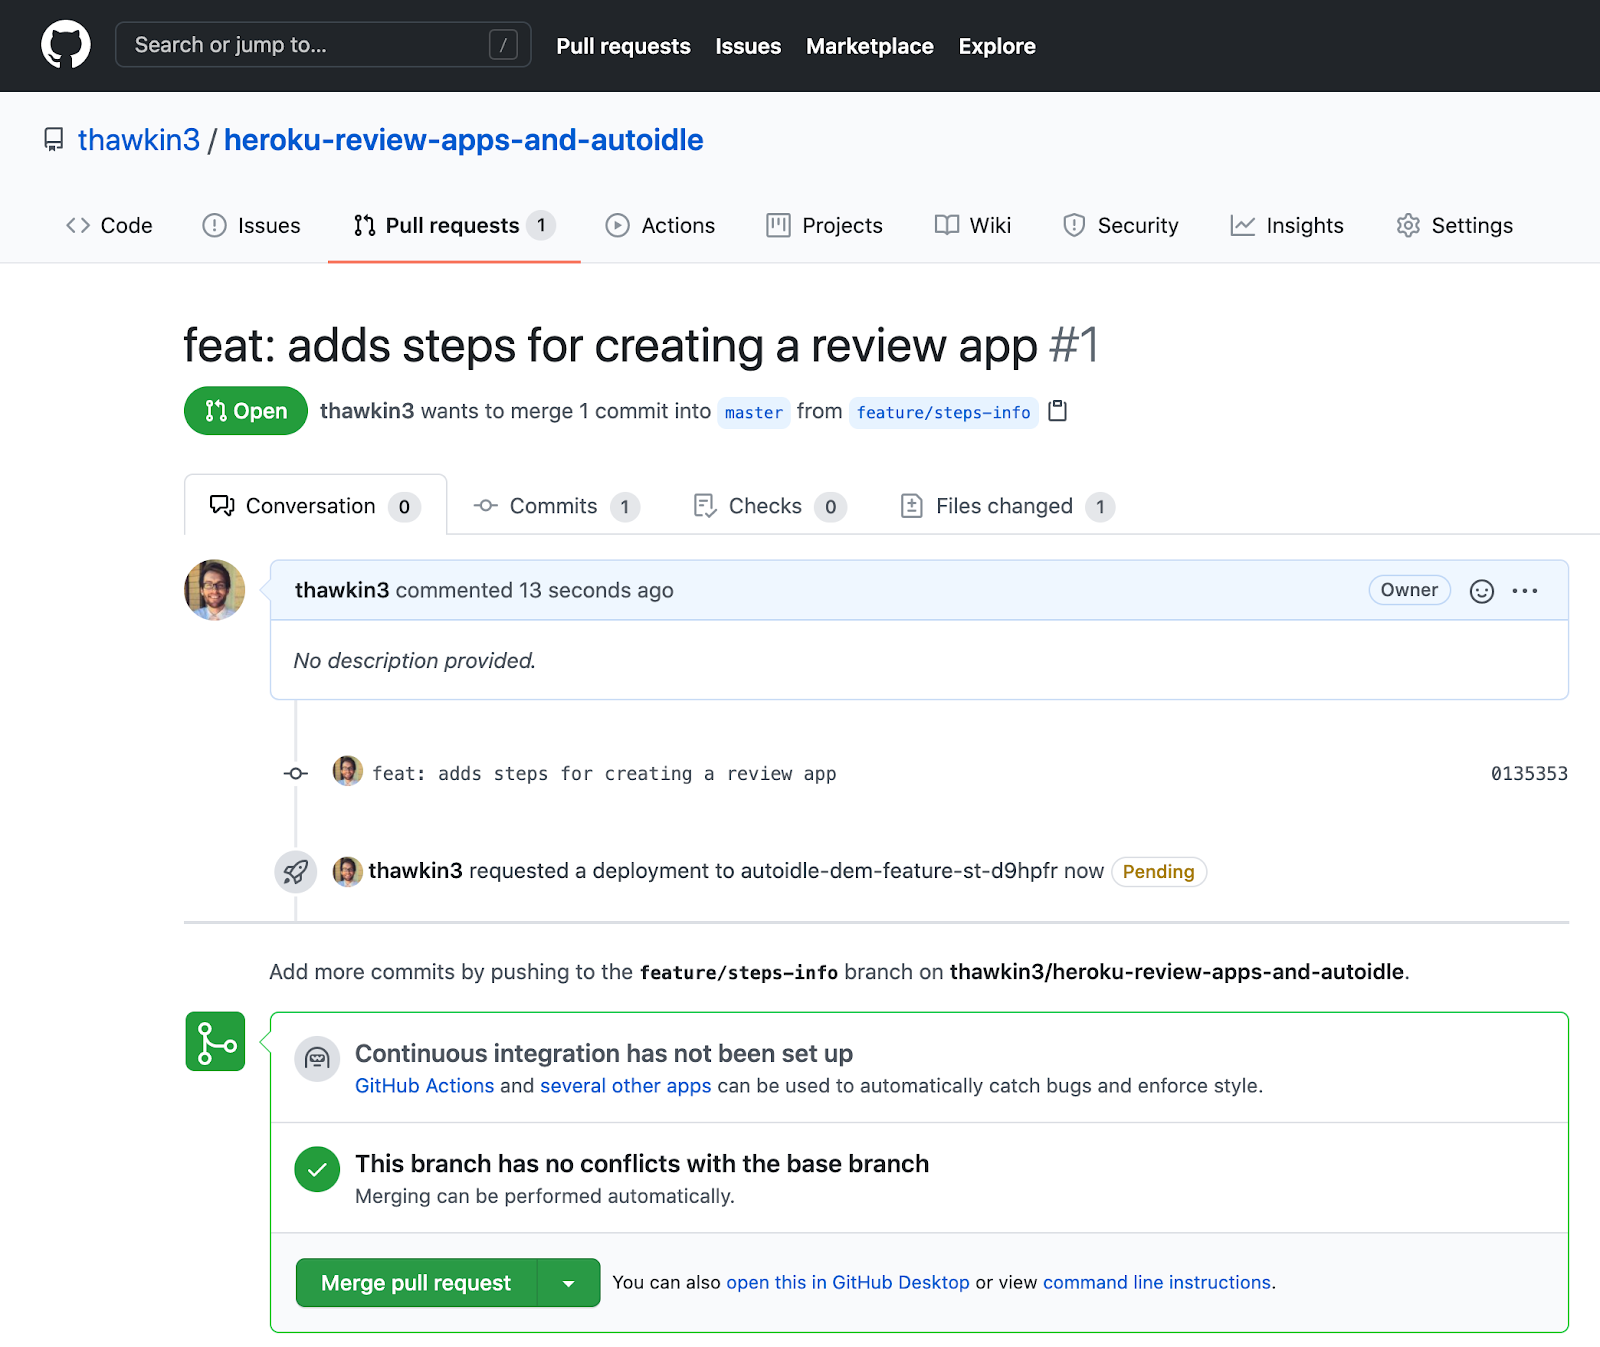 Pending review app deployment as seen in the GitHub pull request